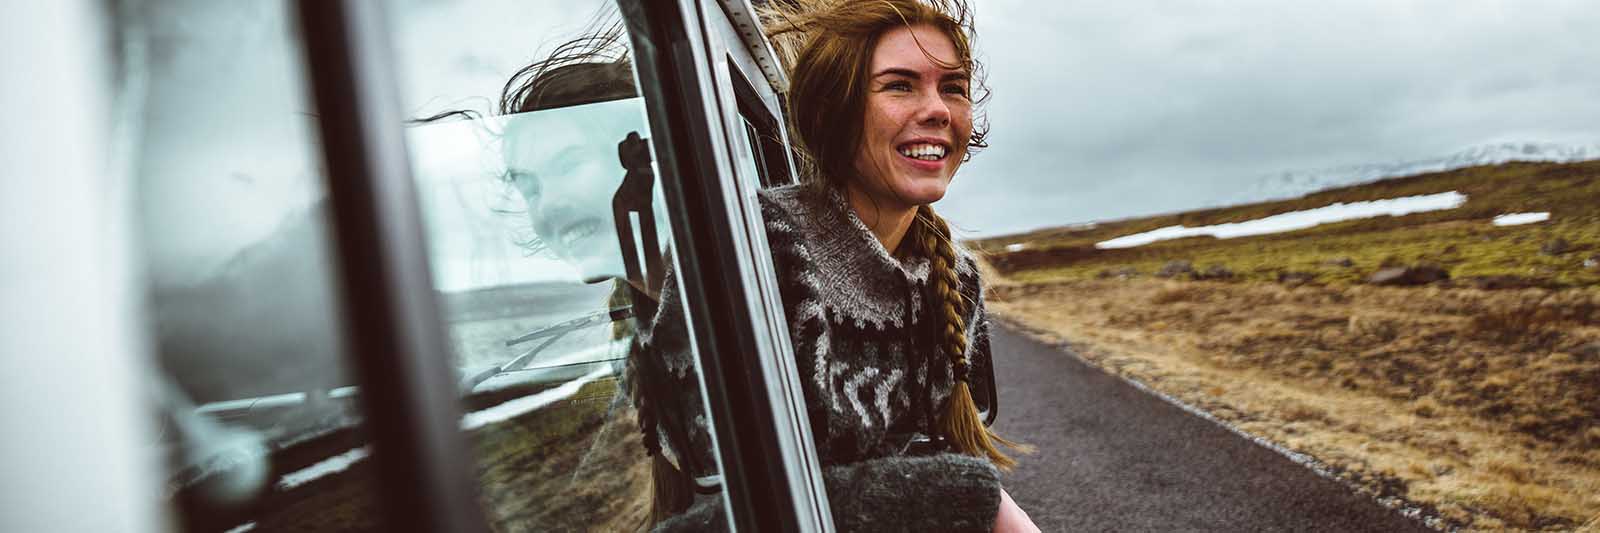 Young woman sticking her head out of a Jeep on a tour